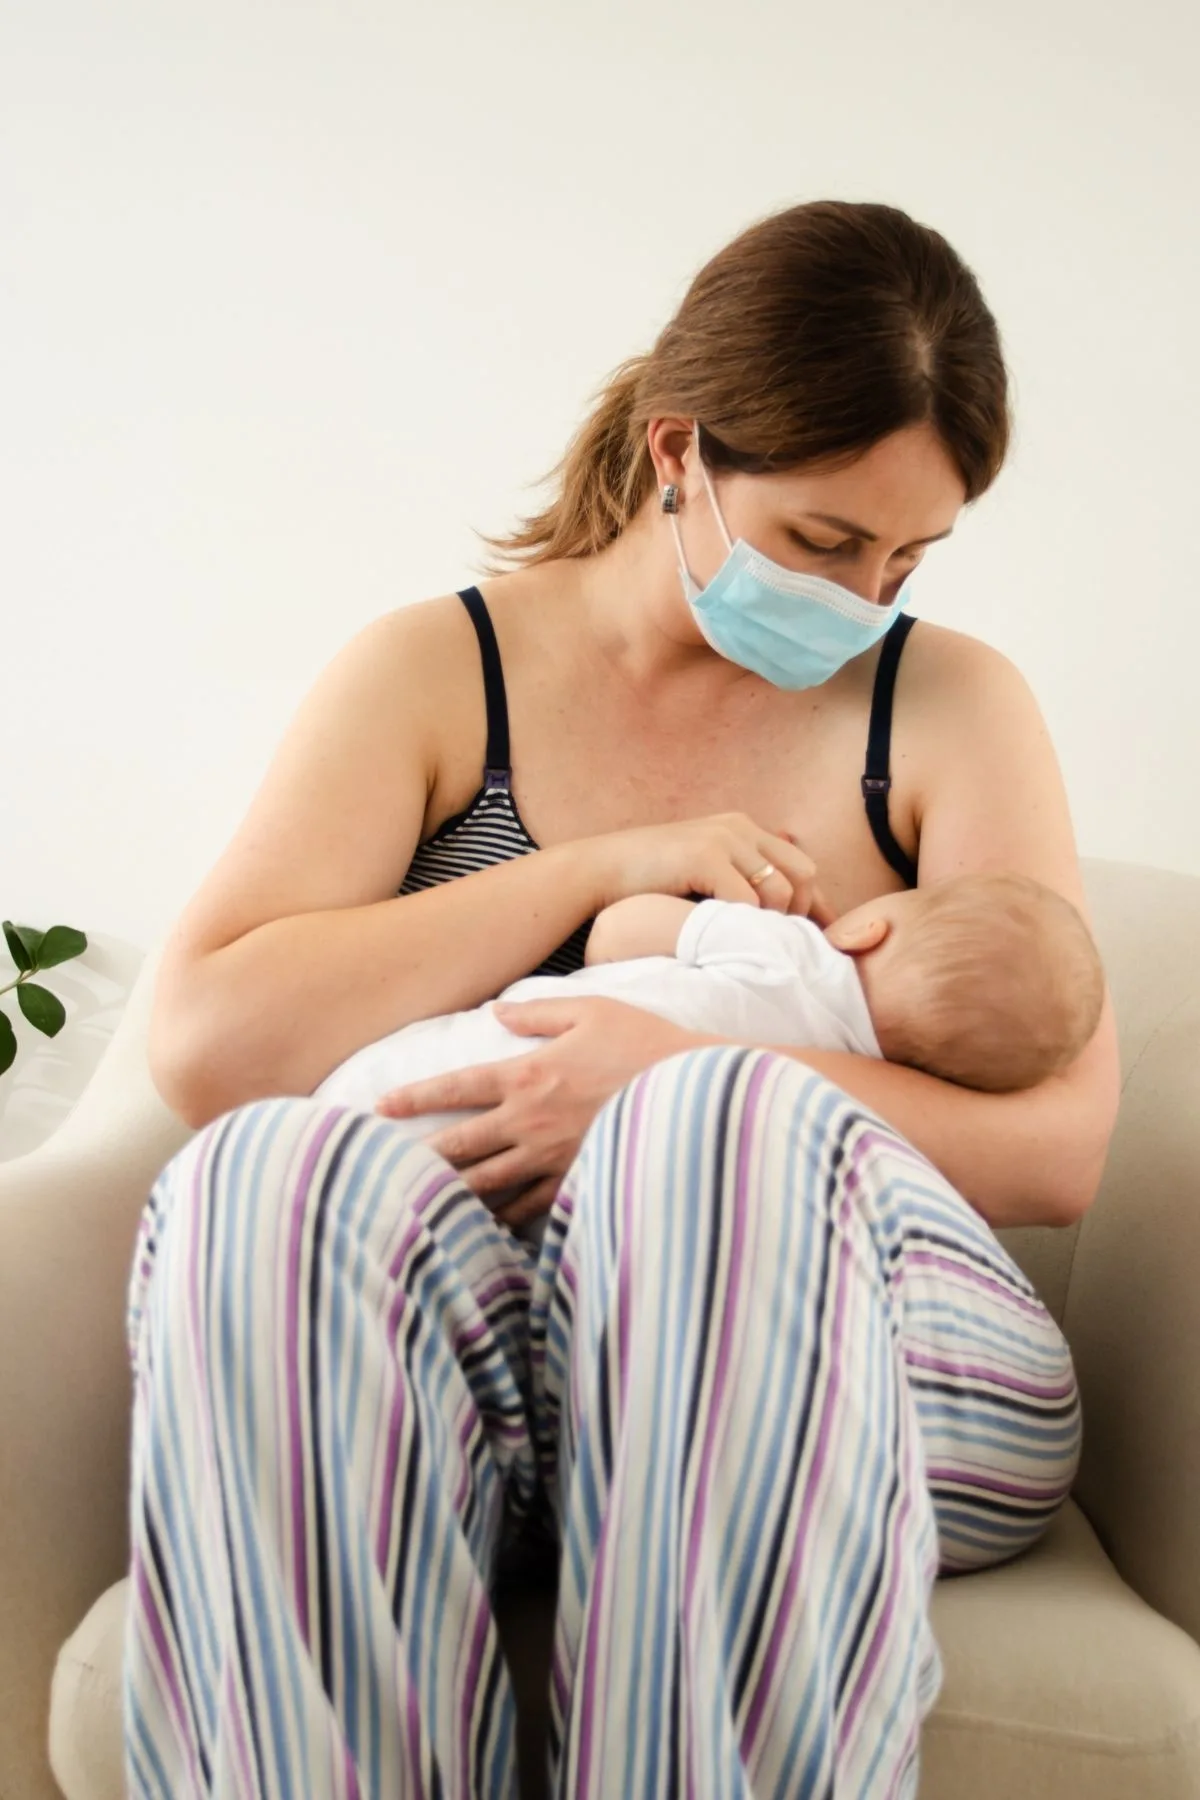 Brunette woman wearing face mask and pajamas sits in beige chair and nurses baby.